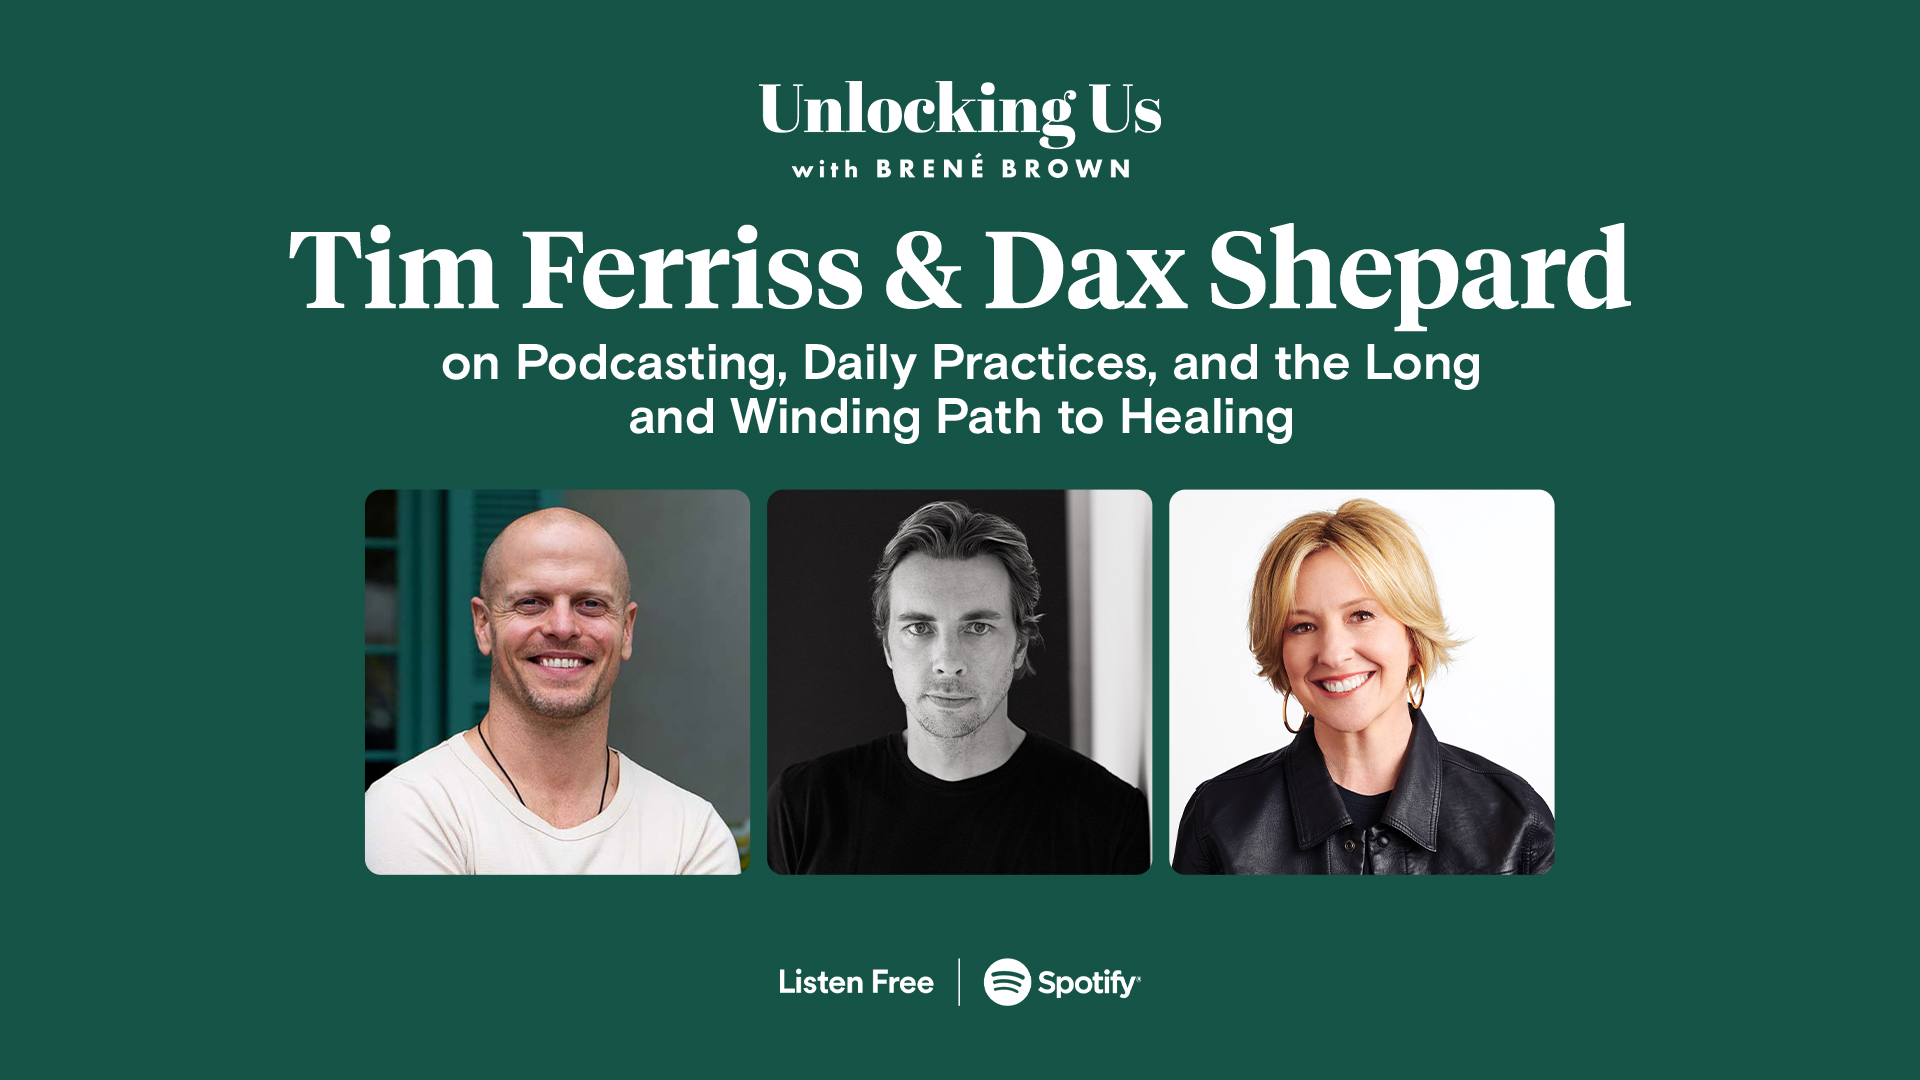 Podcasting, Daily Practices, and the Long Winding Path to Healing - Brené Brown